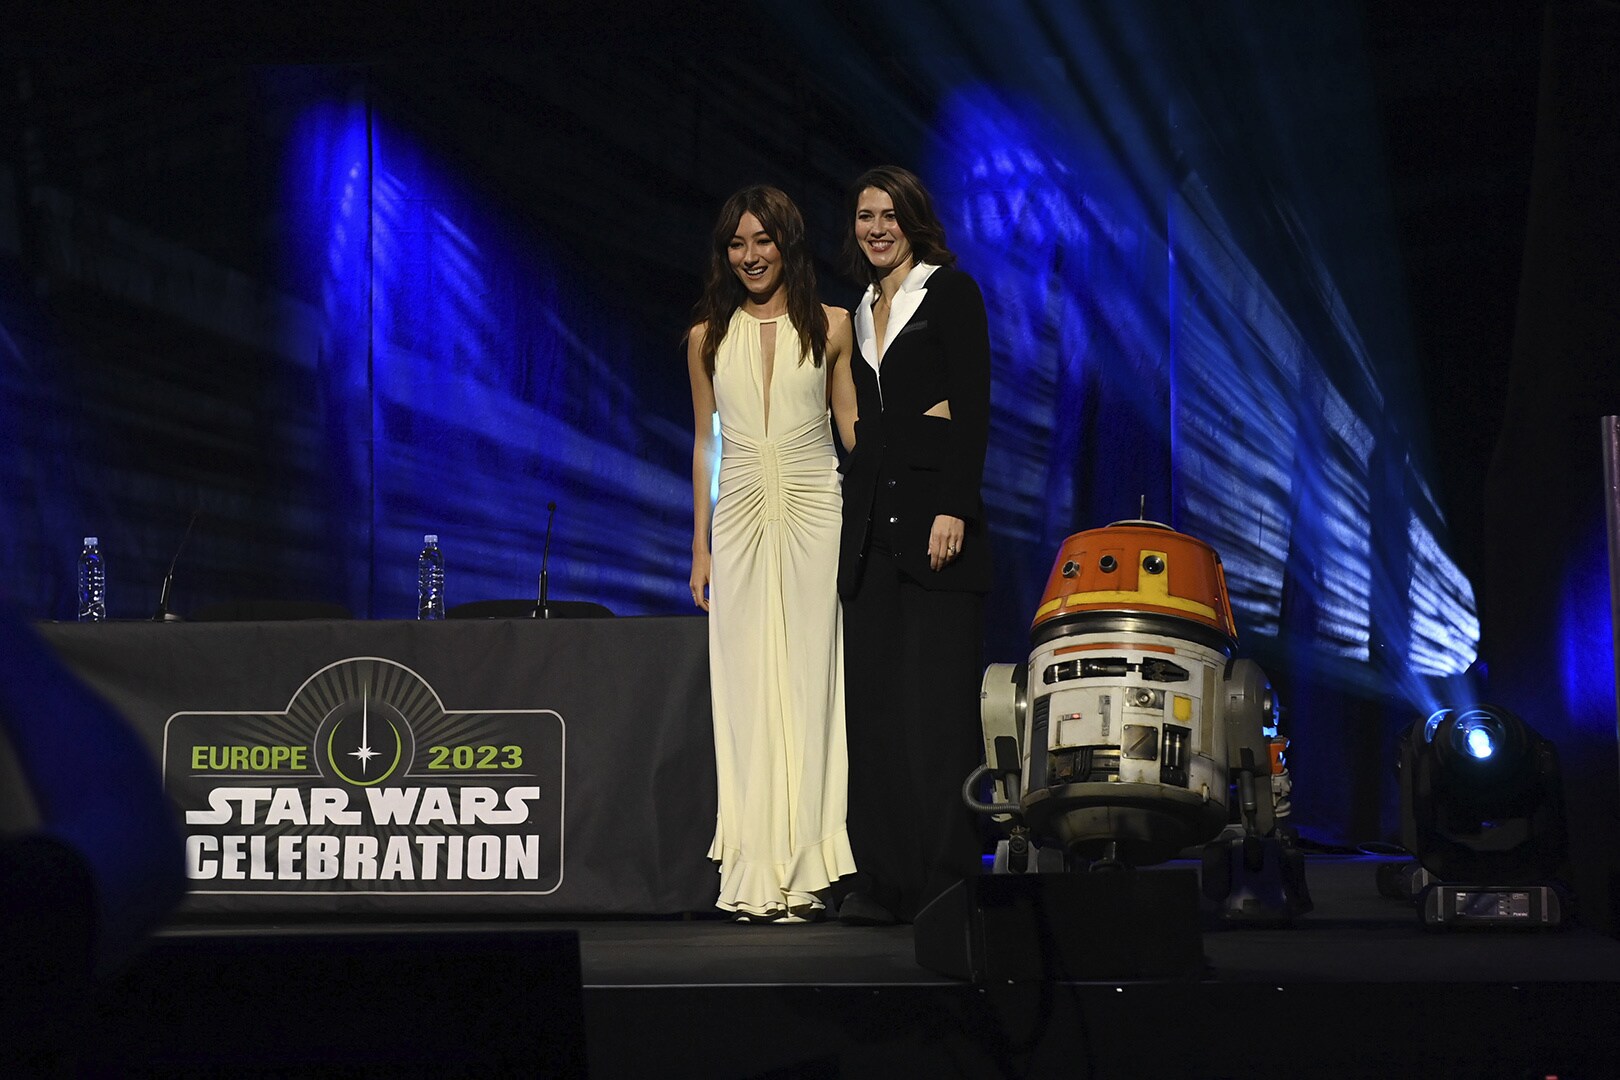 Sabine Wren (played by Natasha Liu Bordizzo) and Hera Syndulla (played by Mary Elizabeth Winstead) also joined the panel.